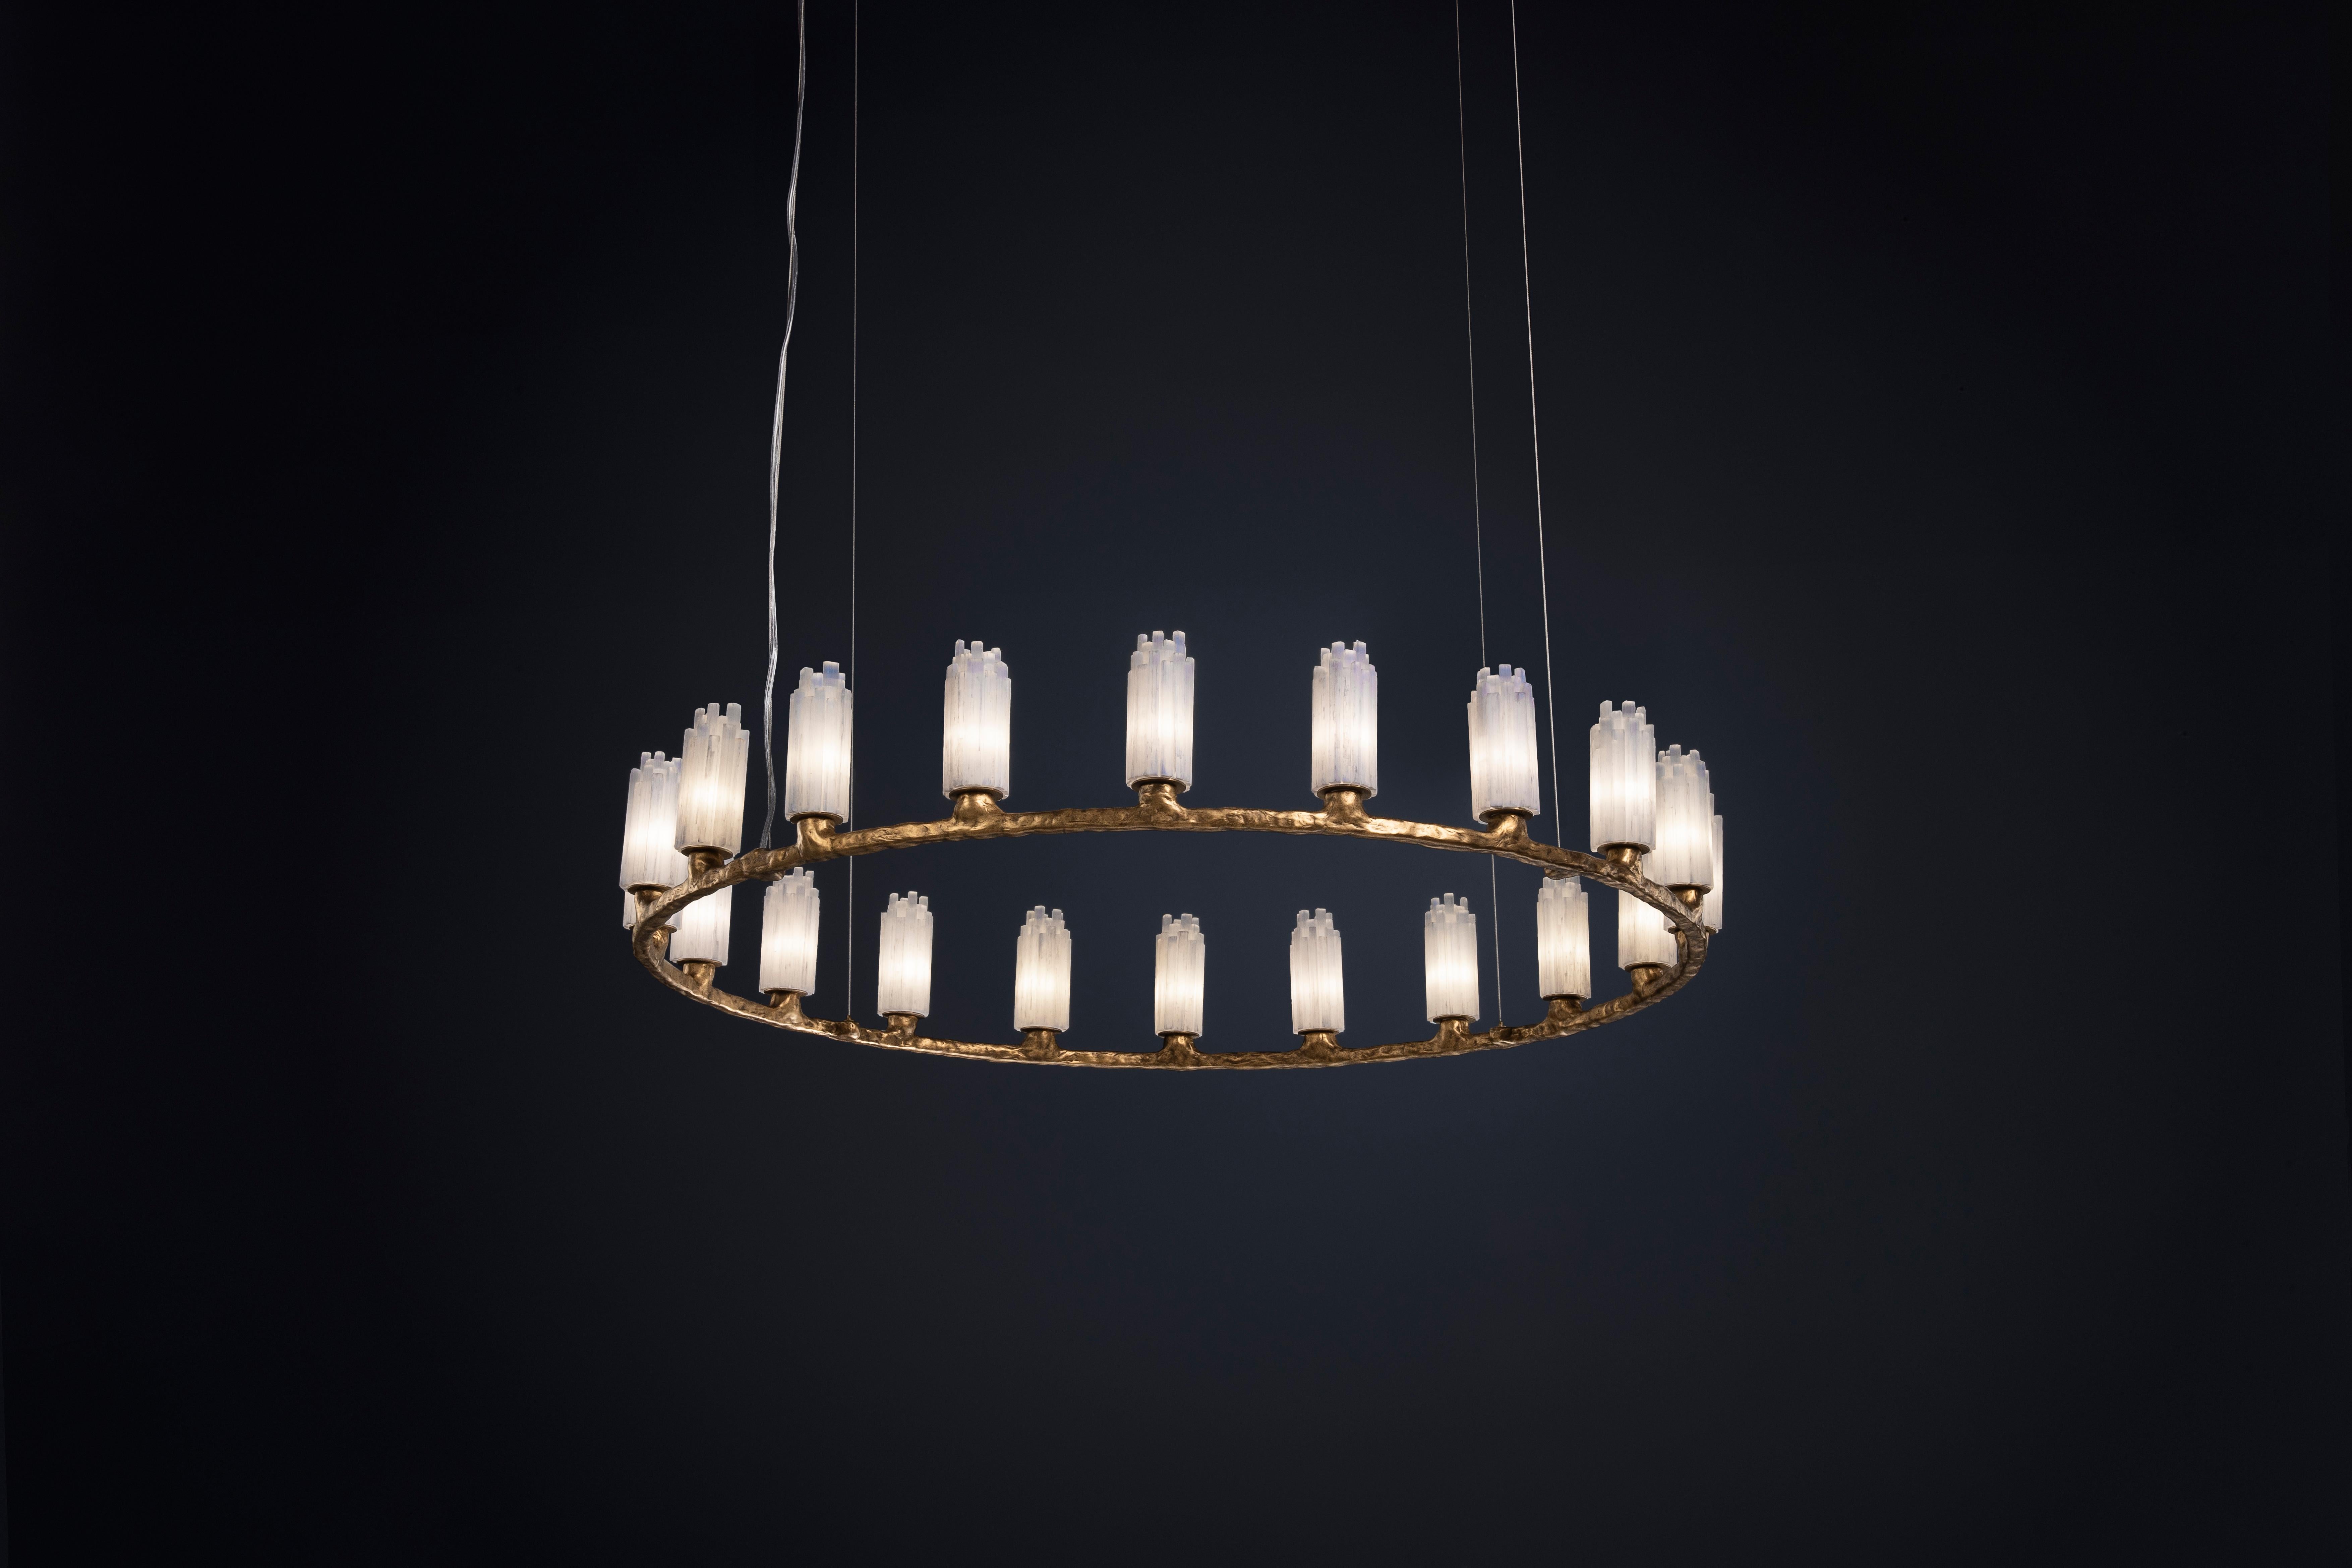 Selenite Pendant Lamp IV by Aver
Dimensions: Ø 103 x H 16.5 cm.
Materials: Metal, selenite.

Different finishes available: Rustic Bronze, Vintage Gold, Aged Copper Veneer, Onyx Veneer, Gold Veneer, Bronze Gold Veneer, Aged Gold Veneer, Smoked Gold